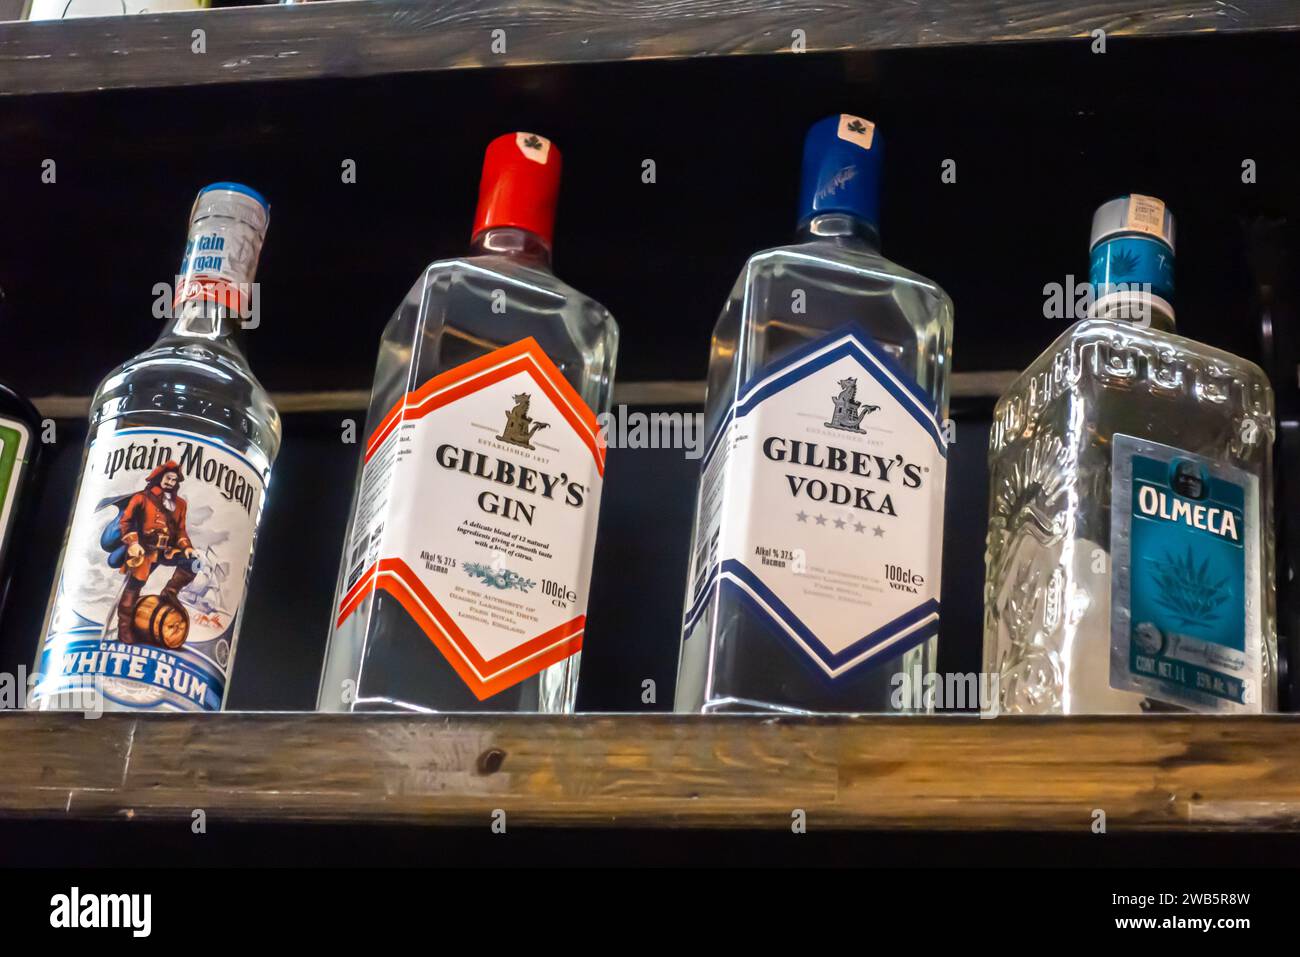 Gilbey's Gin, Gilbey's vodka, Captain Morgan white rum. tequila Olmeca bottles on a bar shelf Stock Photo